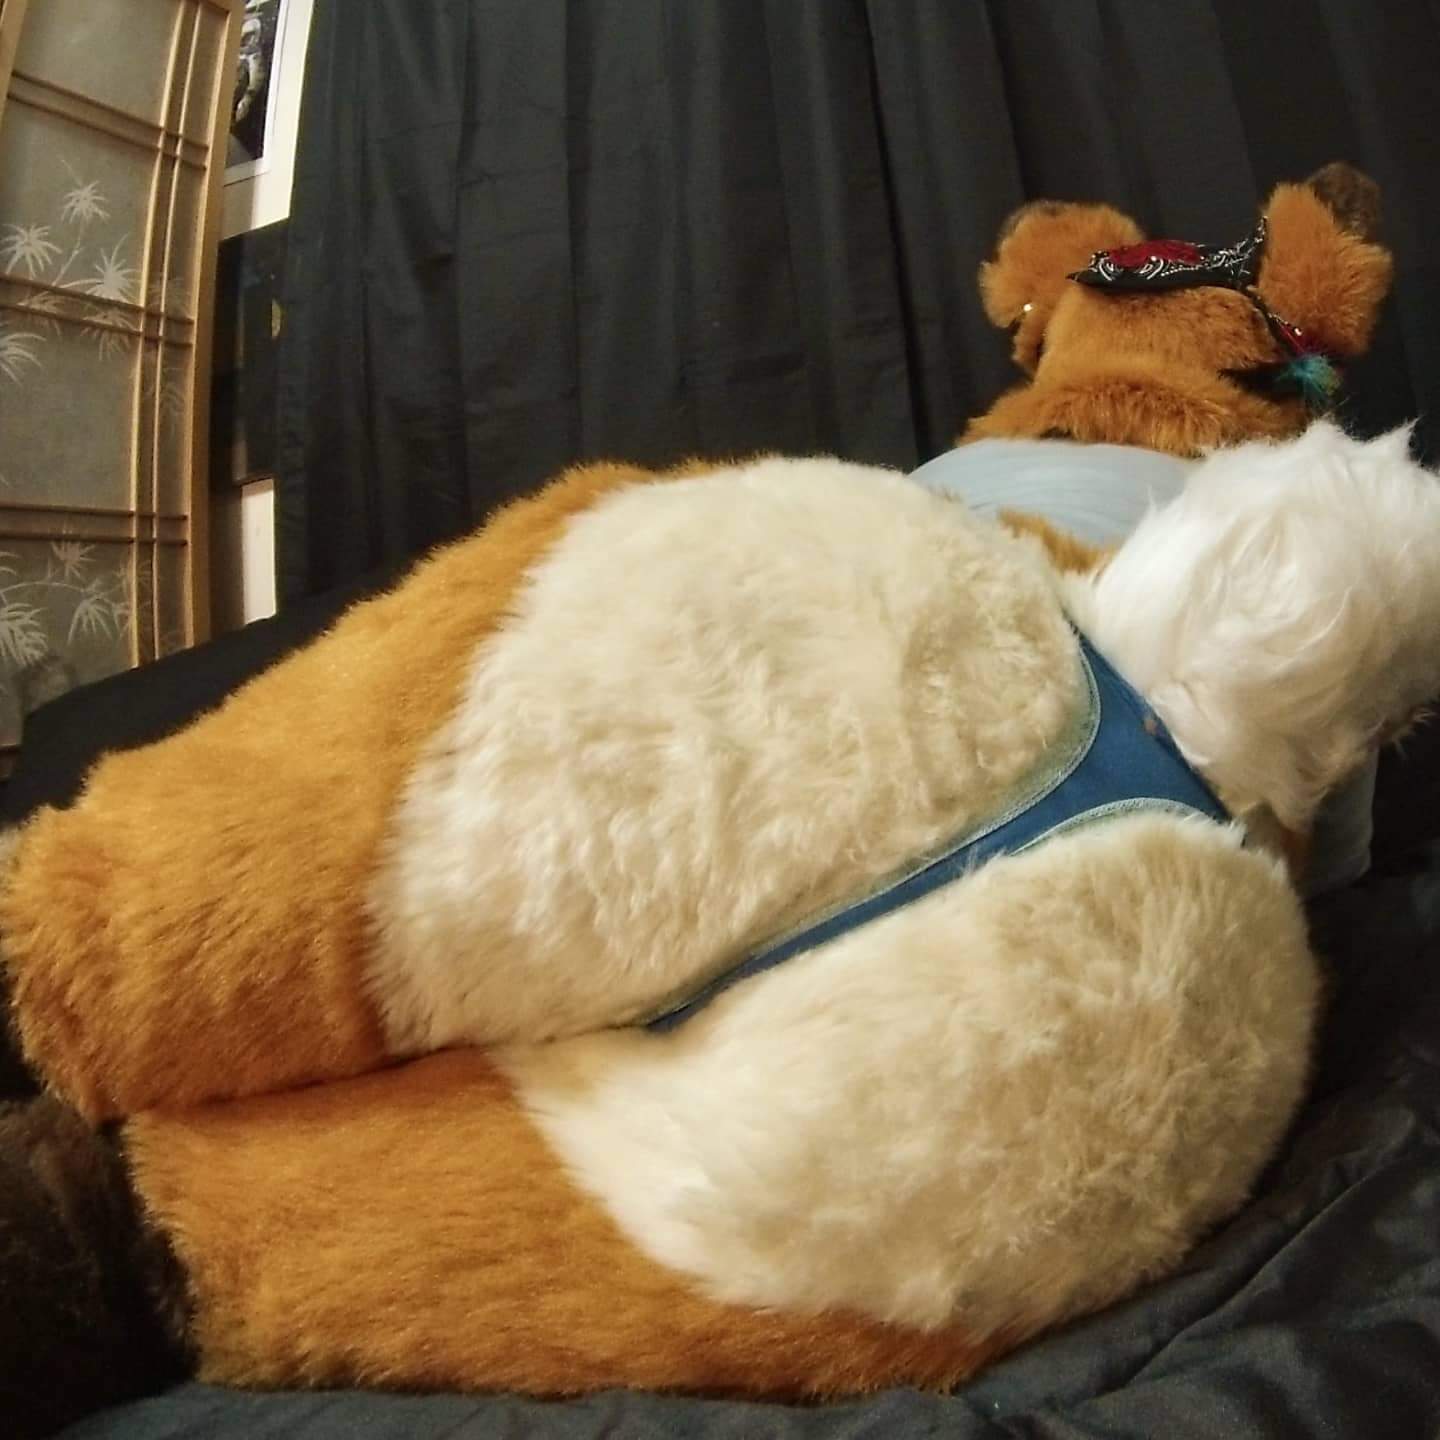 Furry Cosplay Porn Anal - Fursuit ass butts shake - ThisVid.com